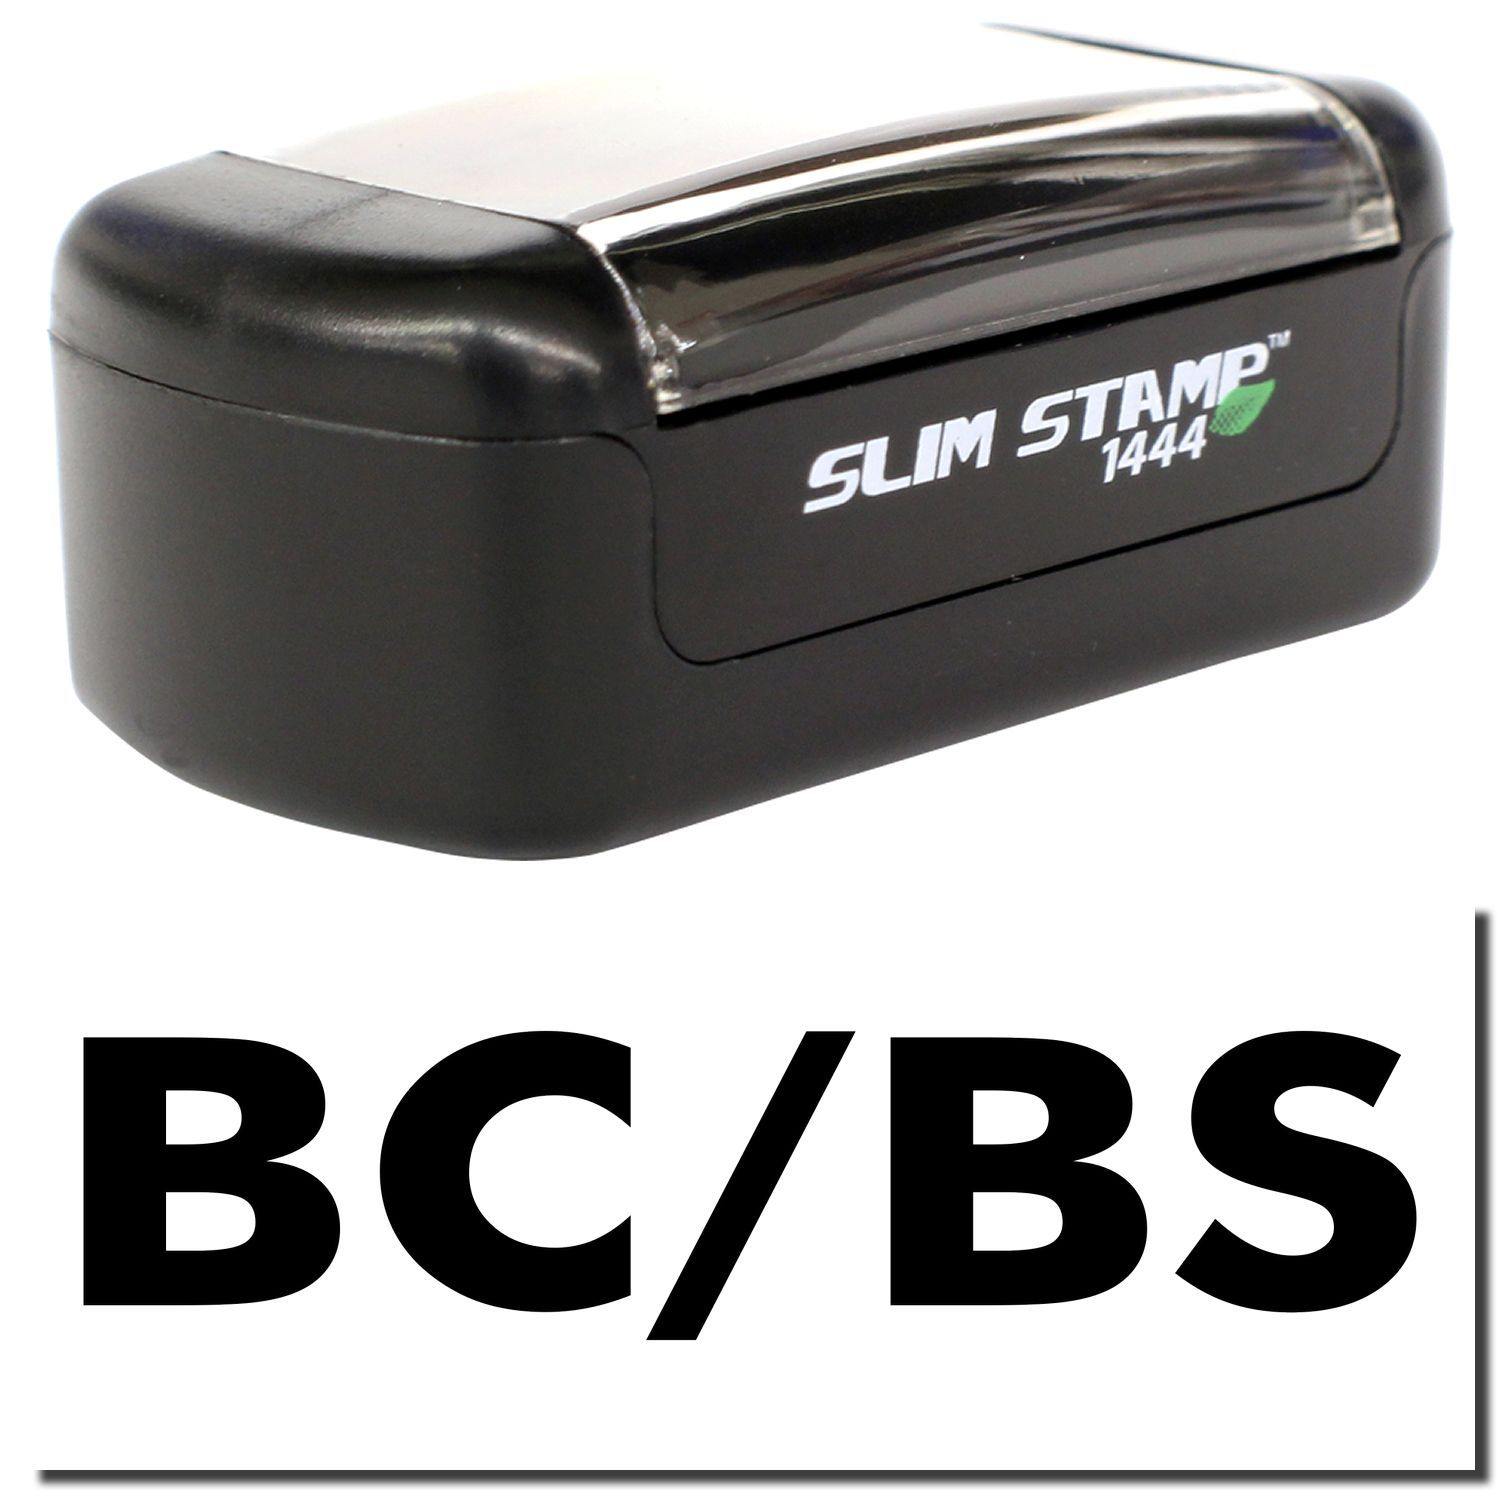 A stock office pre-inked stamp with a stamped image showing how the text "BC/BS" is displayed after stamping.